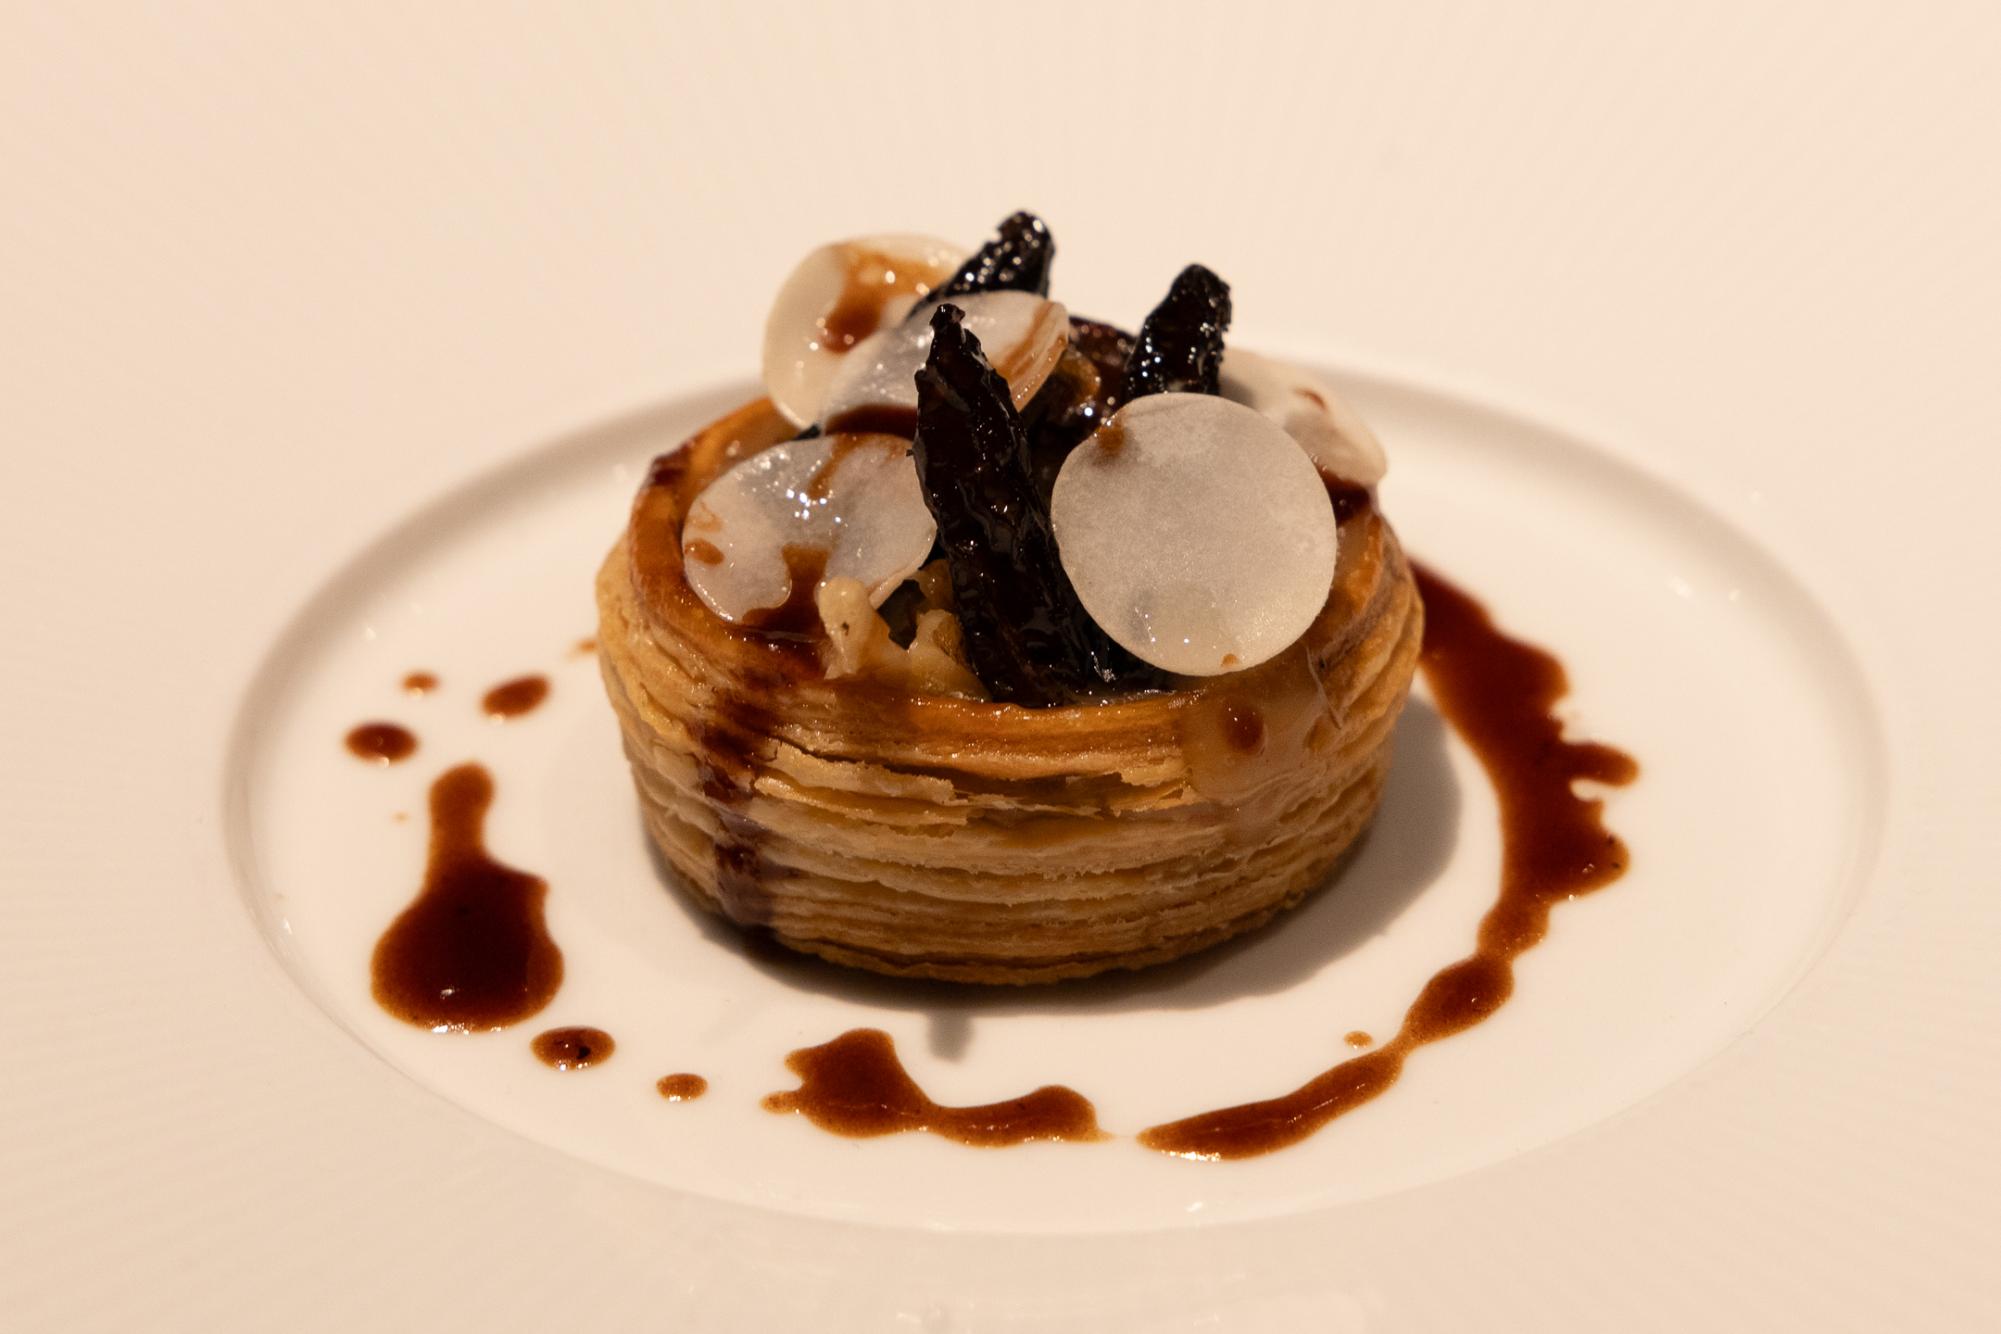 Pastry with mushrooms and brown sauce.